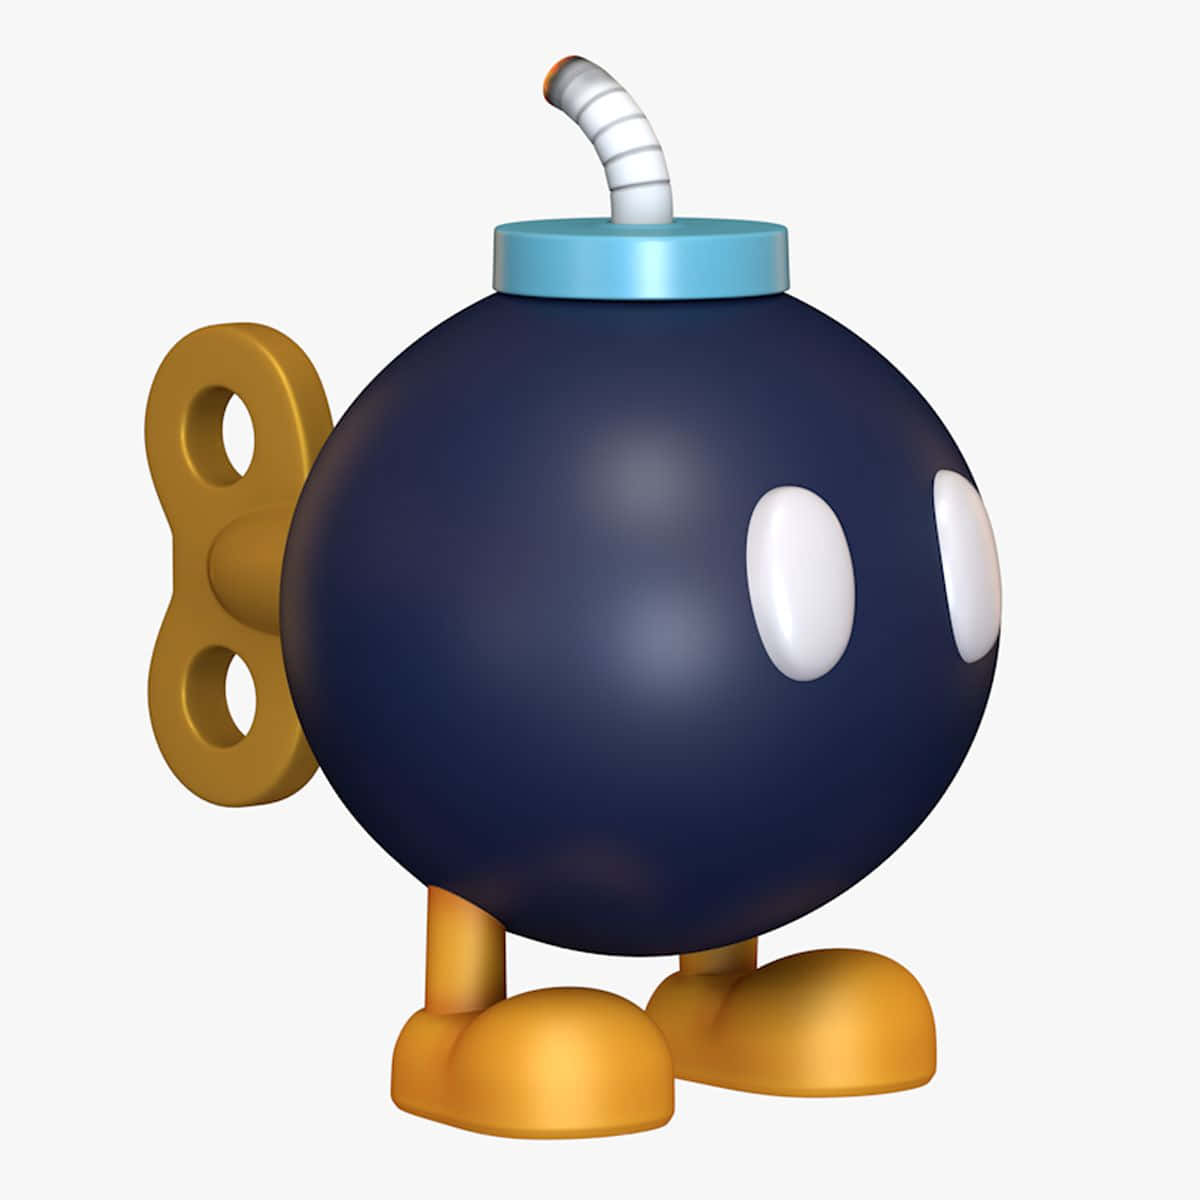 Bob-omb character from the famous Super Mario game series depicted in high definition art. Wallpaper